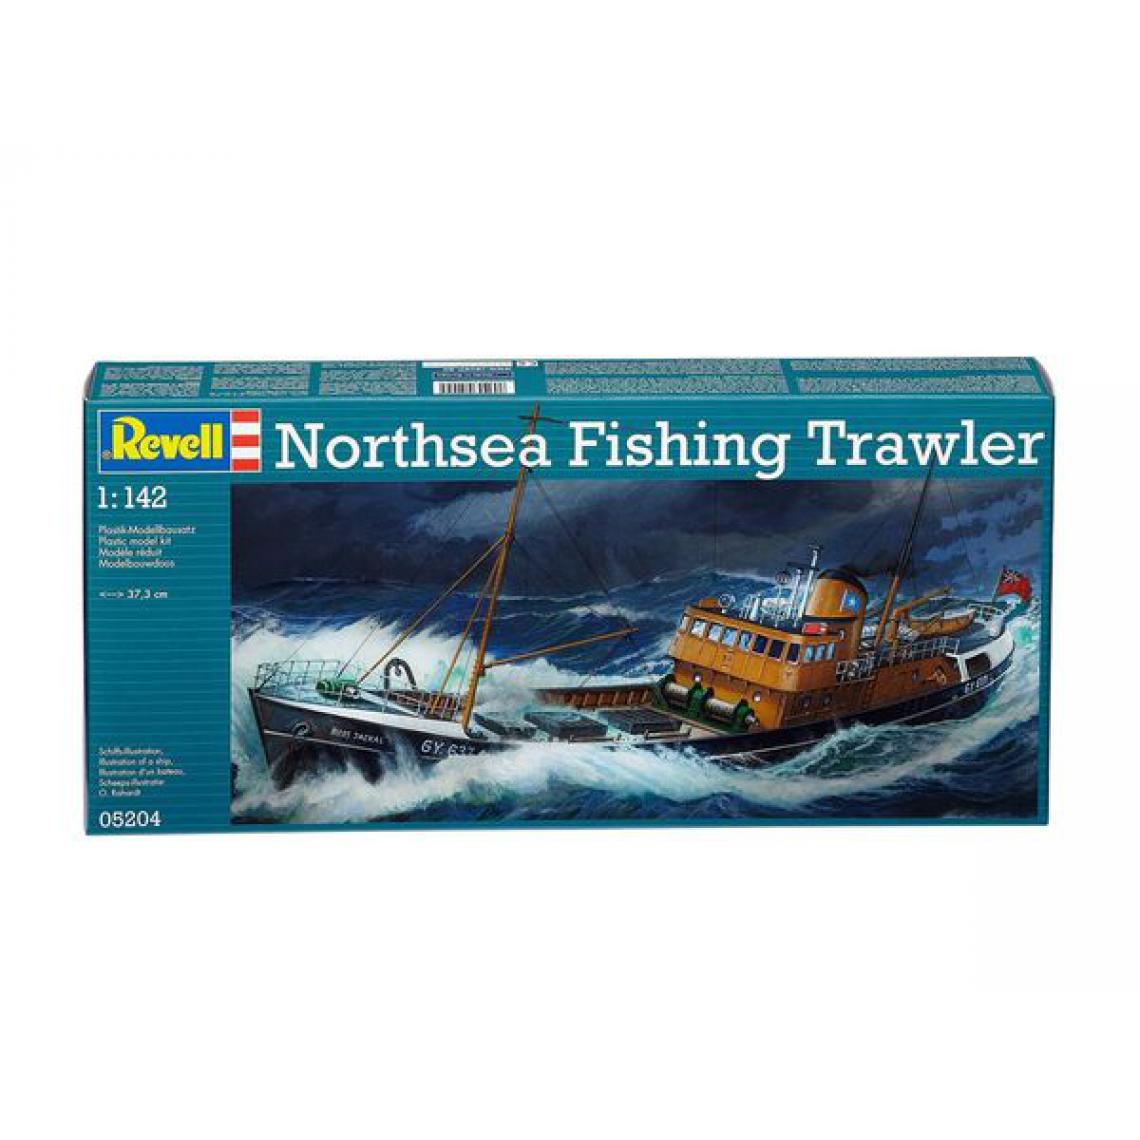 Revell - Northsea Fishing Trawler - 1:142e - Revell - Accessoires et pièces